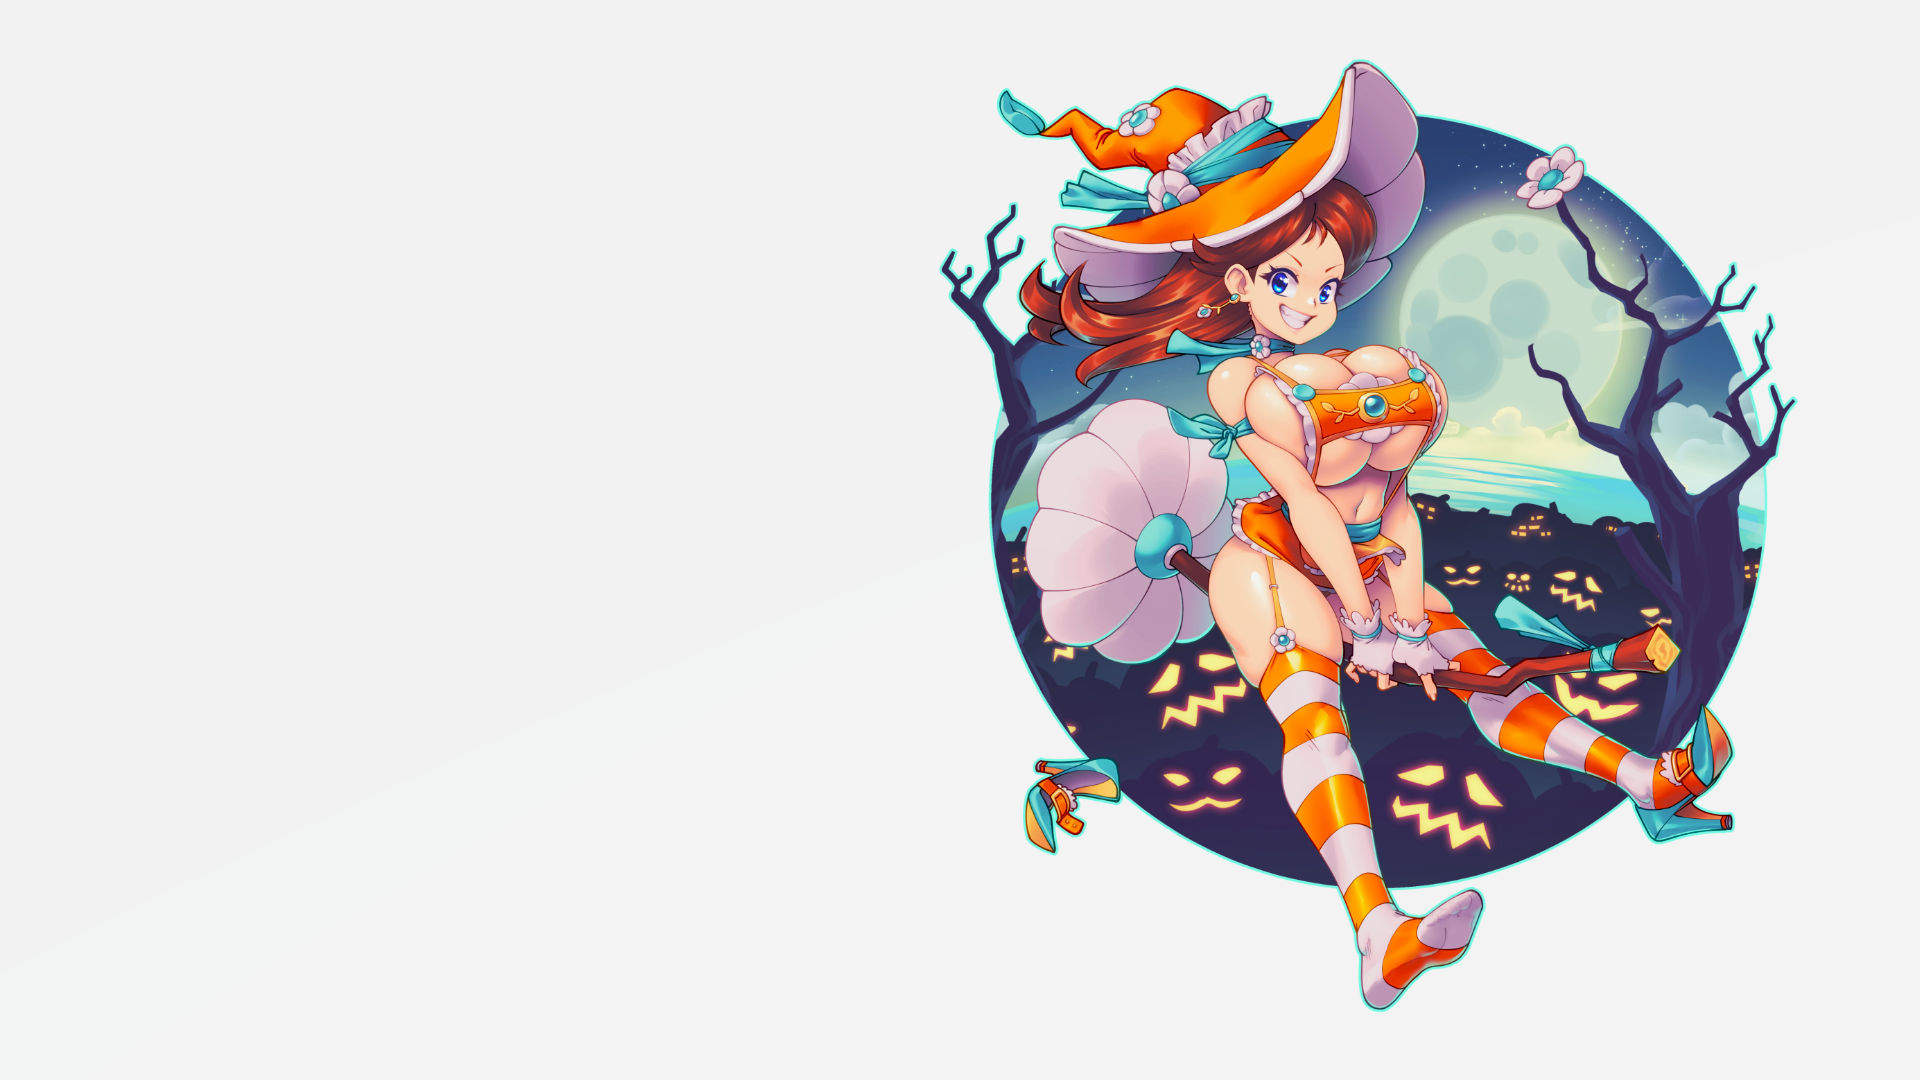 Anime 1920x1080 Princess Daisy huge breasts big boobs Super Mario white background smiling looking at viewer hat long hair pumpkin dead trees stockings striped stockings earring heels simple background minimalism witch hat witch stars